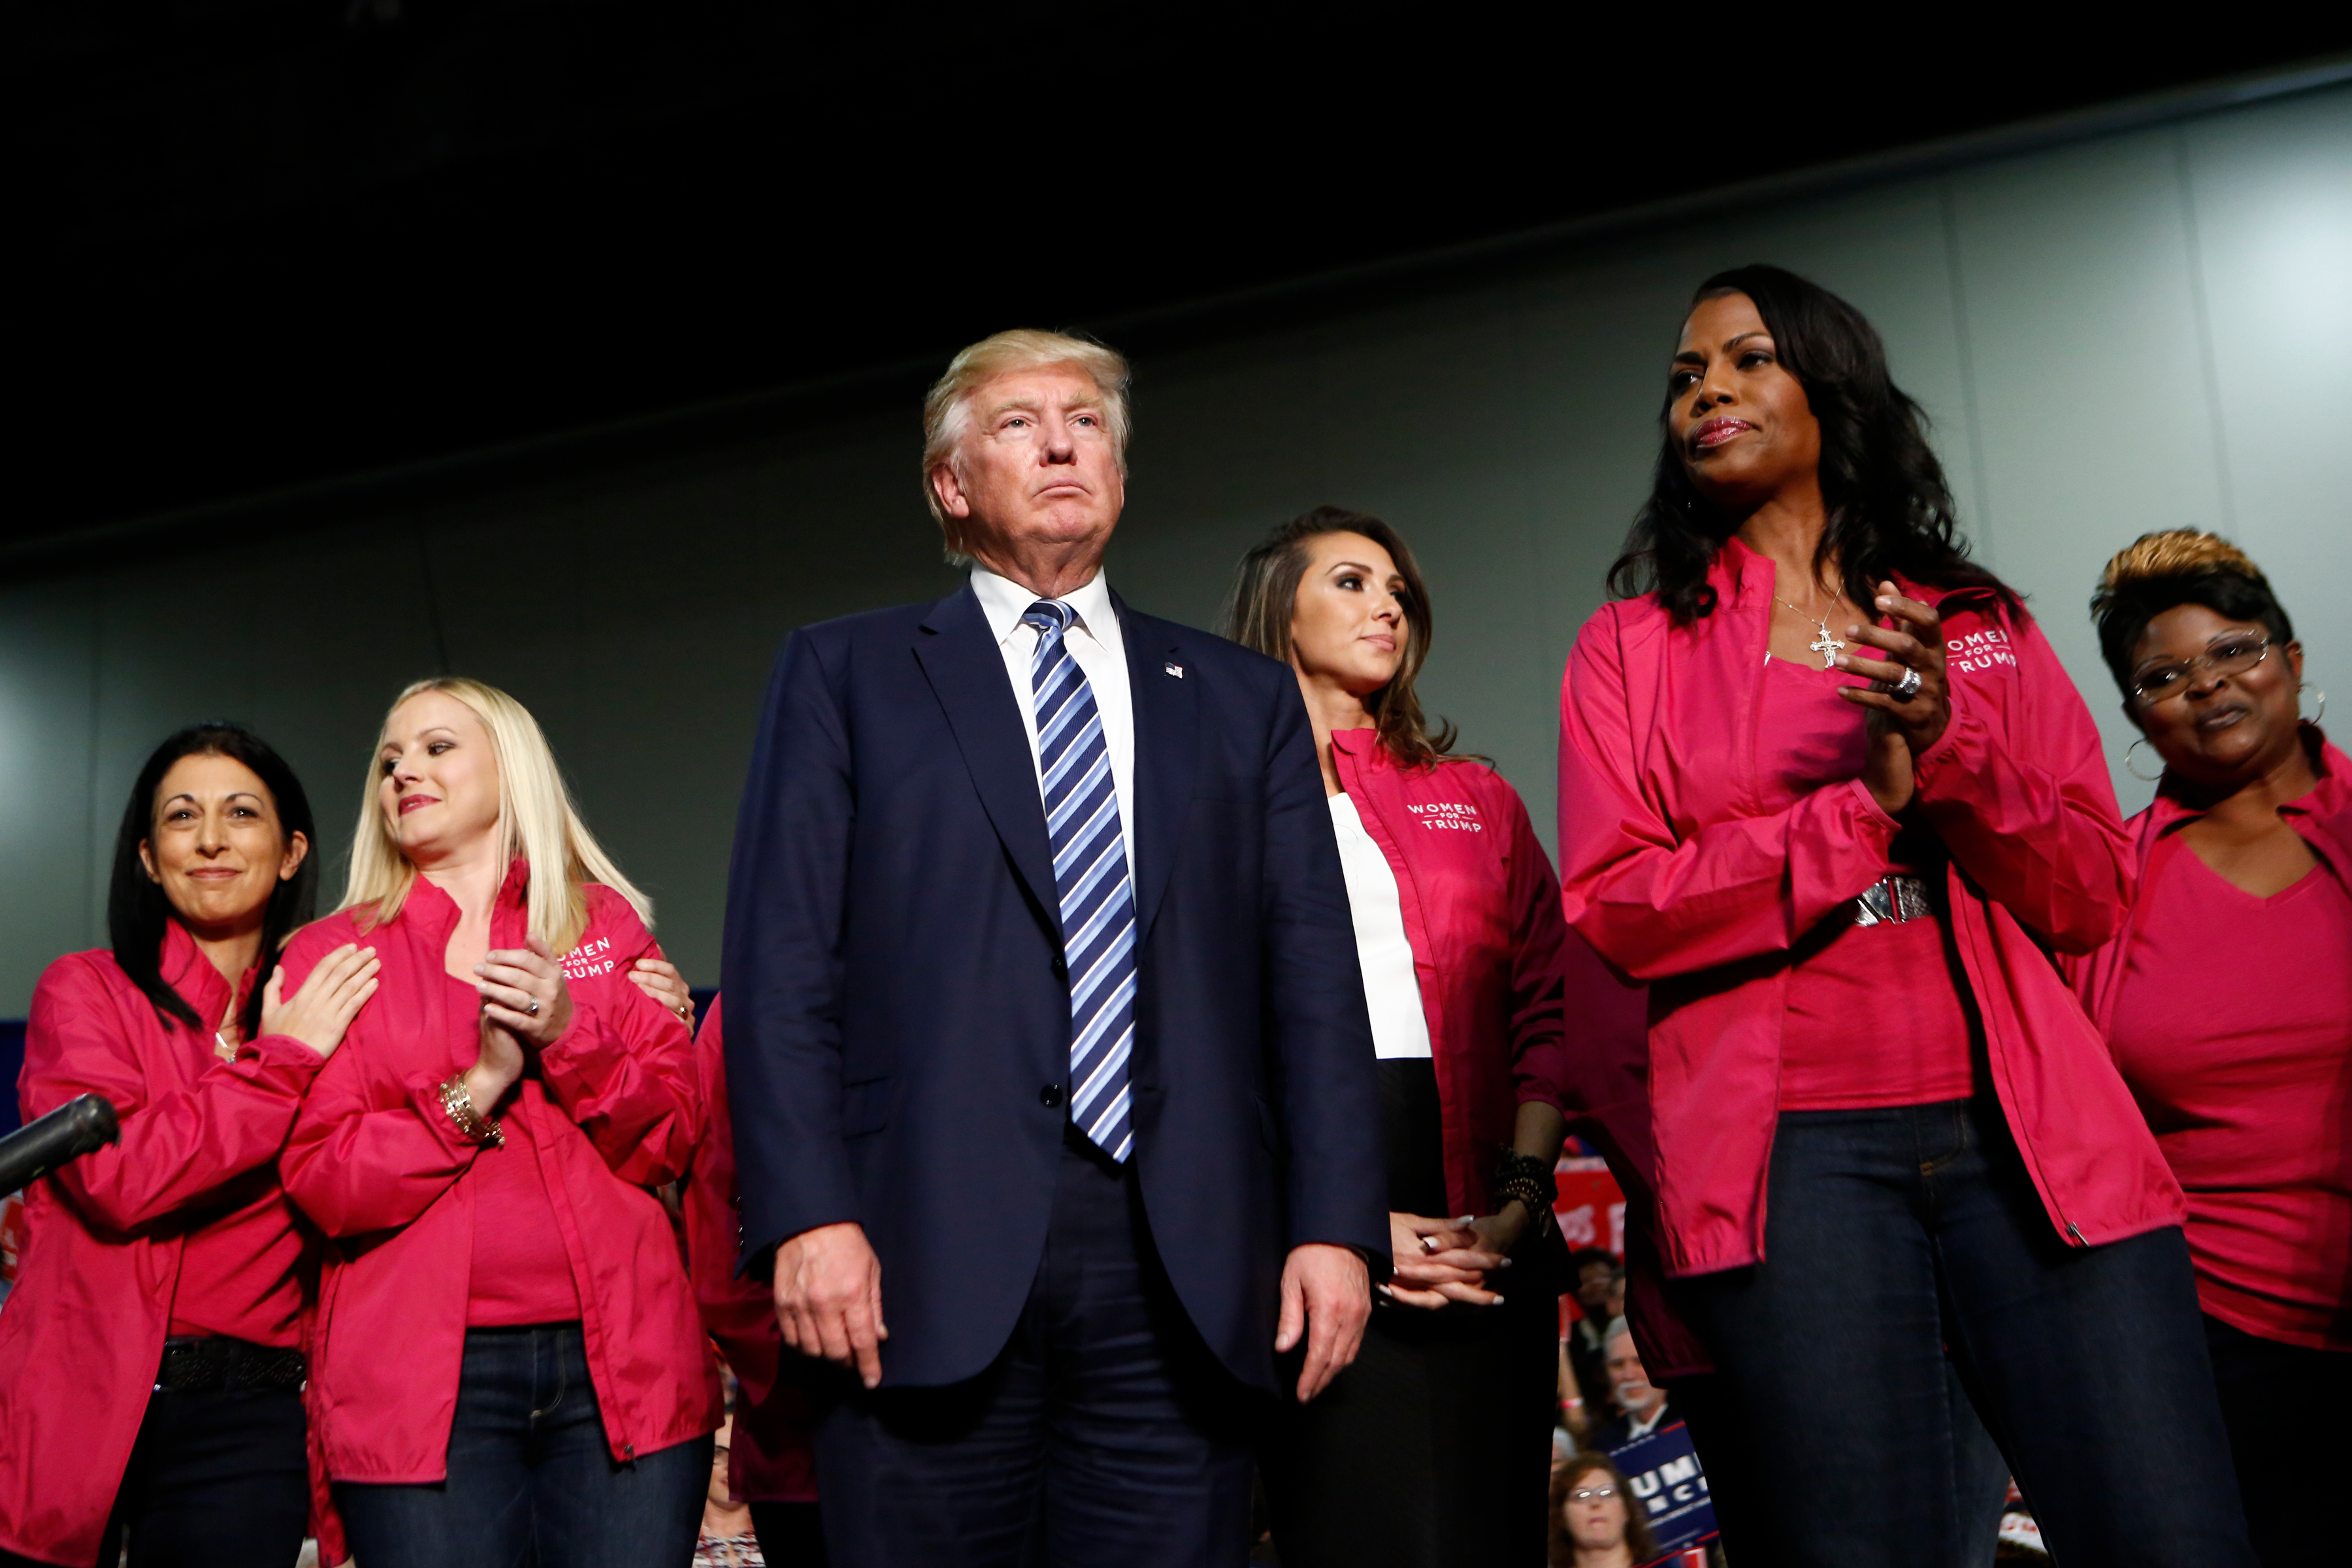 Republican presidential candidate Donald Trump stands with Women for Trump as he speaks to supporters at a rally on October 14, 2016 in Charlotte, North Carolina. Recent polls show the nominee has low support from the gender. (Brian Blanco&mdash;Getty Images)